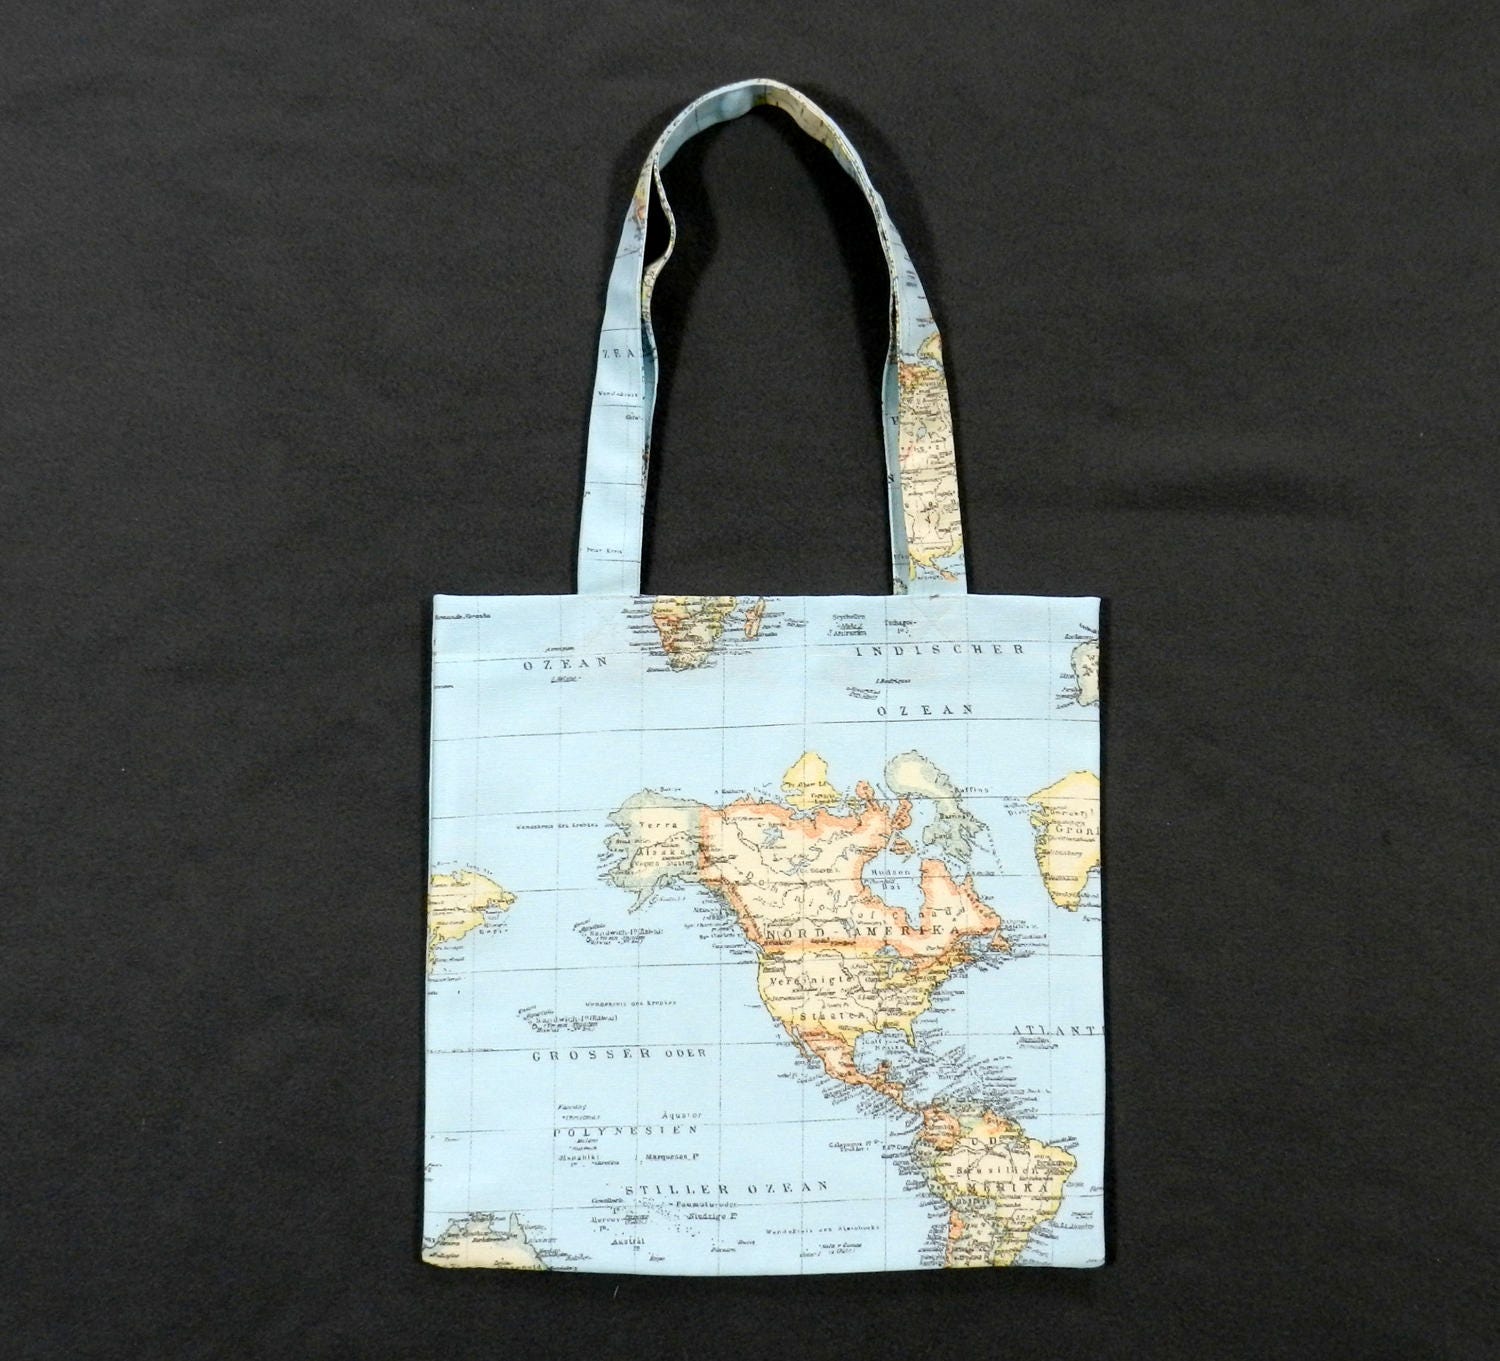 World map book bag Shopping bag Tote bag Lined fabric